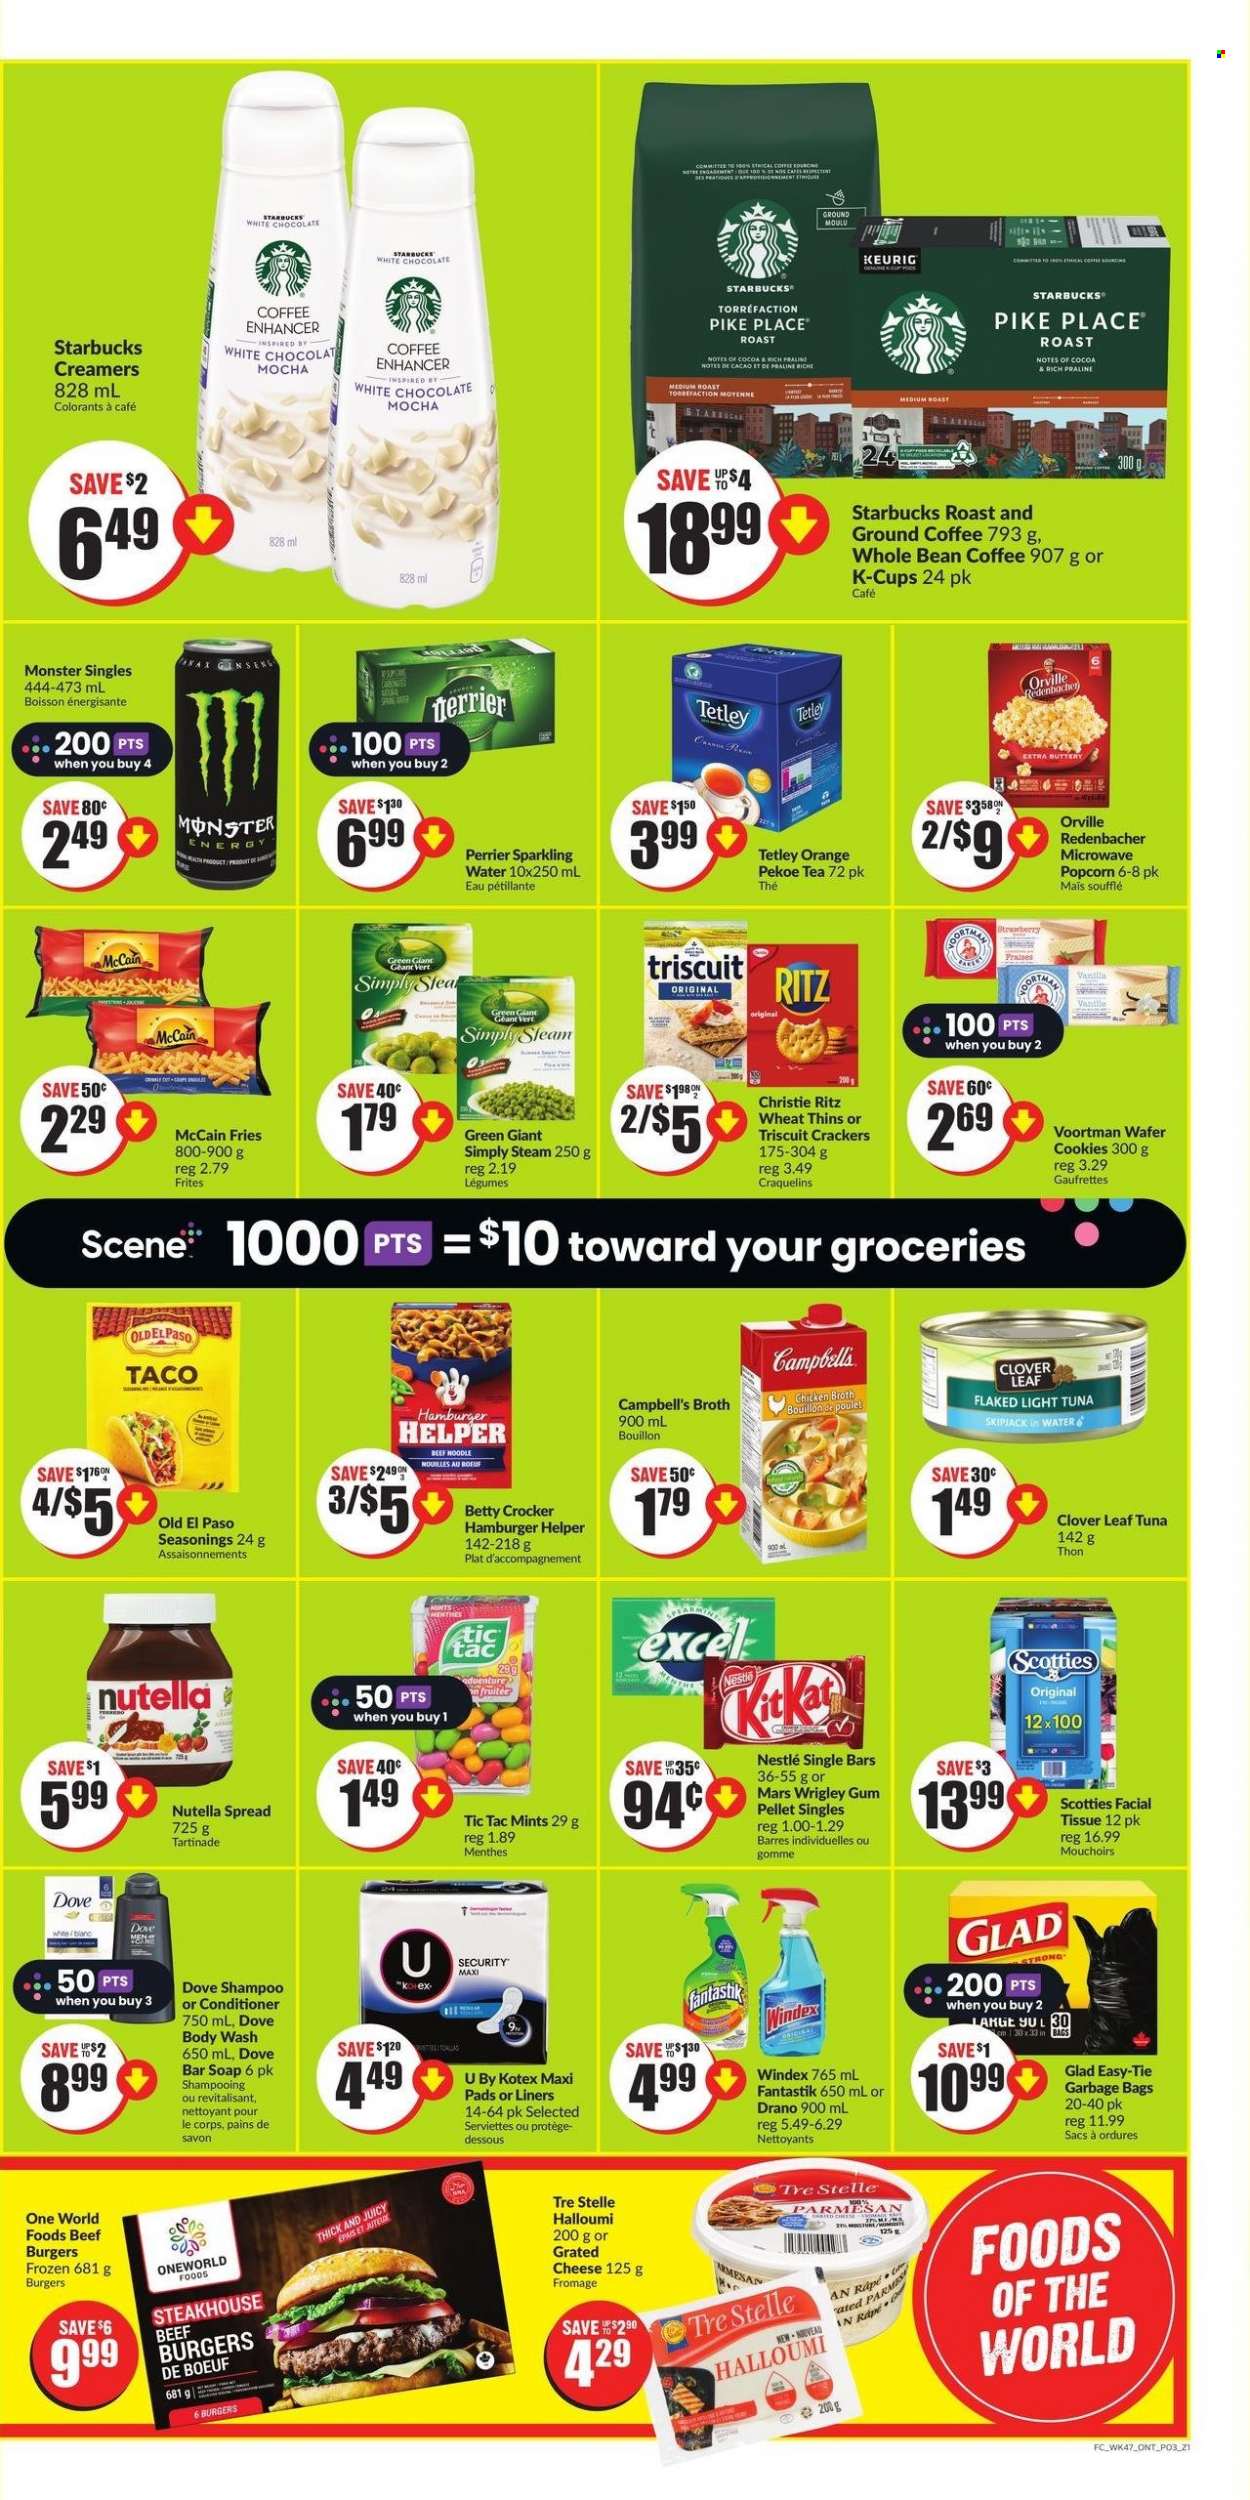 thumbnail - FreshCo. Flyer - March 23, 2023 - March 29, 2023 - Sales products - Old El Paso, oranges, tuna, Campbell's, beef burger, roast, halloumi, parmesan, cheese, grated cheese, Clover, McCain, potato fries, cookies, Dove, wafers, white chocolate, chocolate, Mars, KitKat, crackers, Tic Tac, RITZ, Thins, popcorn, bouillon, chicken broth, broth, light tuna, Monster, Monster Energy, Perrier, sparkling water, water, tea, coffee, ground coffee, coffee capsules, Starbucks, K-Cups, Keurig, tissues, Windex, body wash, soap bar, soap, sanitary pads, Kotex, serviettes, Nestlé, shampoo, Nutella. Page 3.